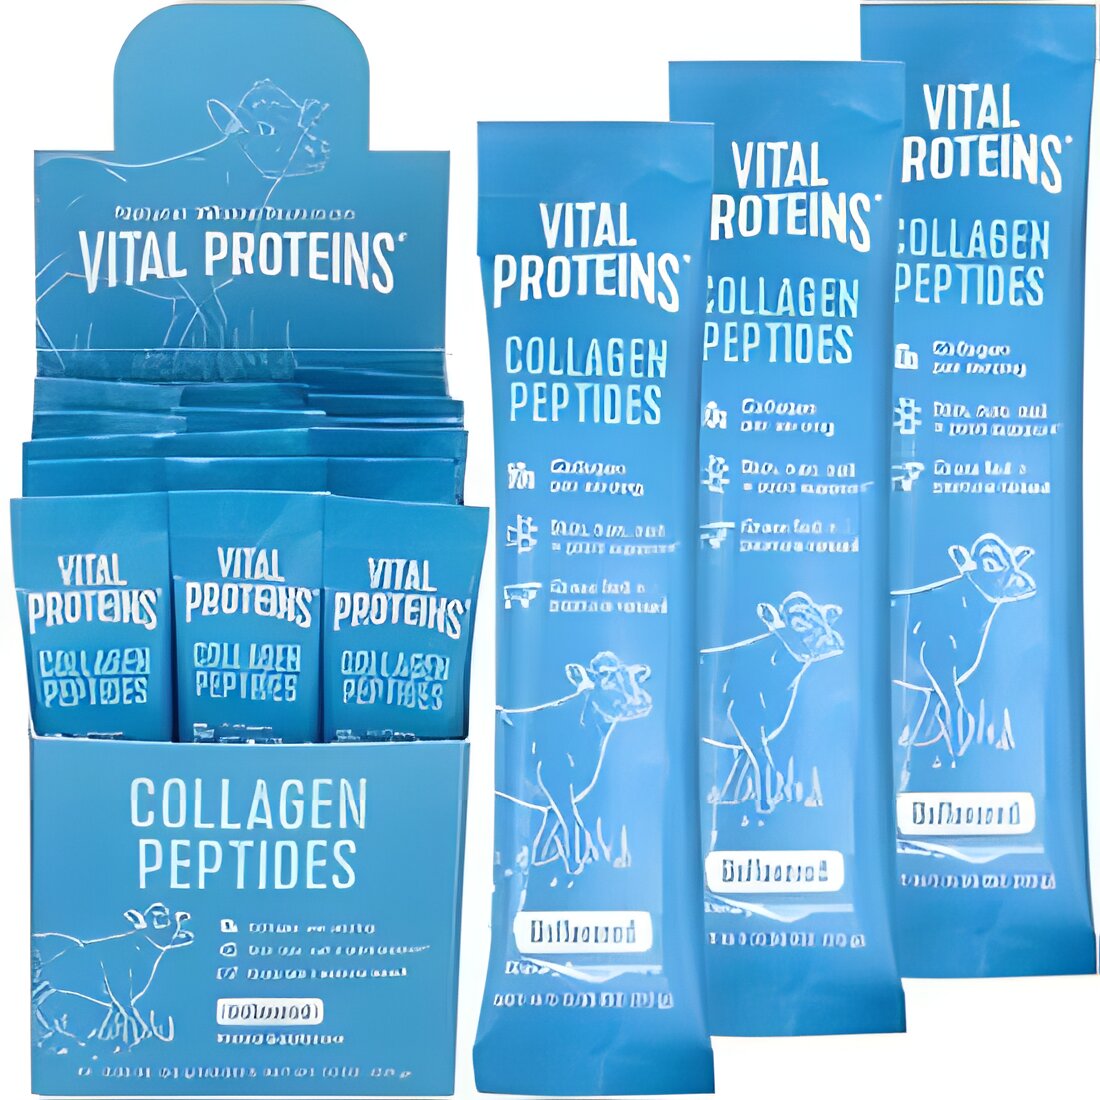 Free Vital Proteins Collagen Peptides Samples